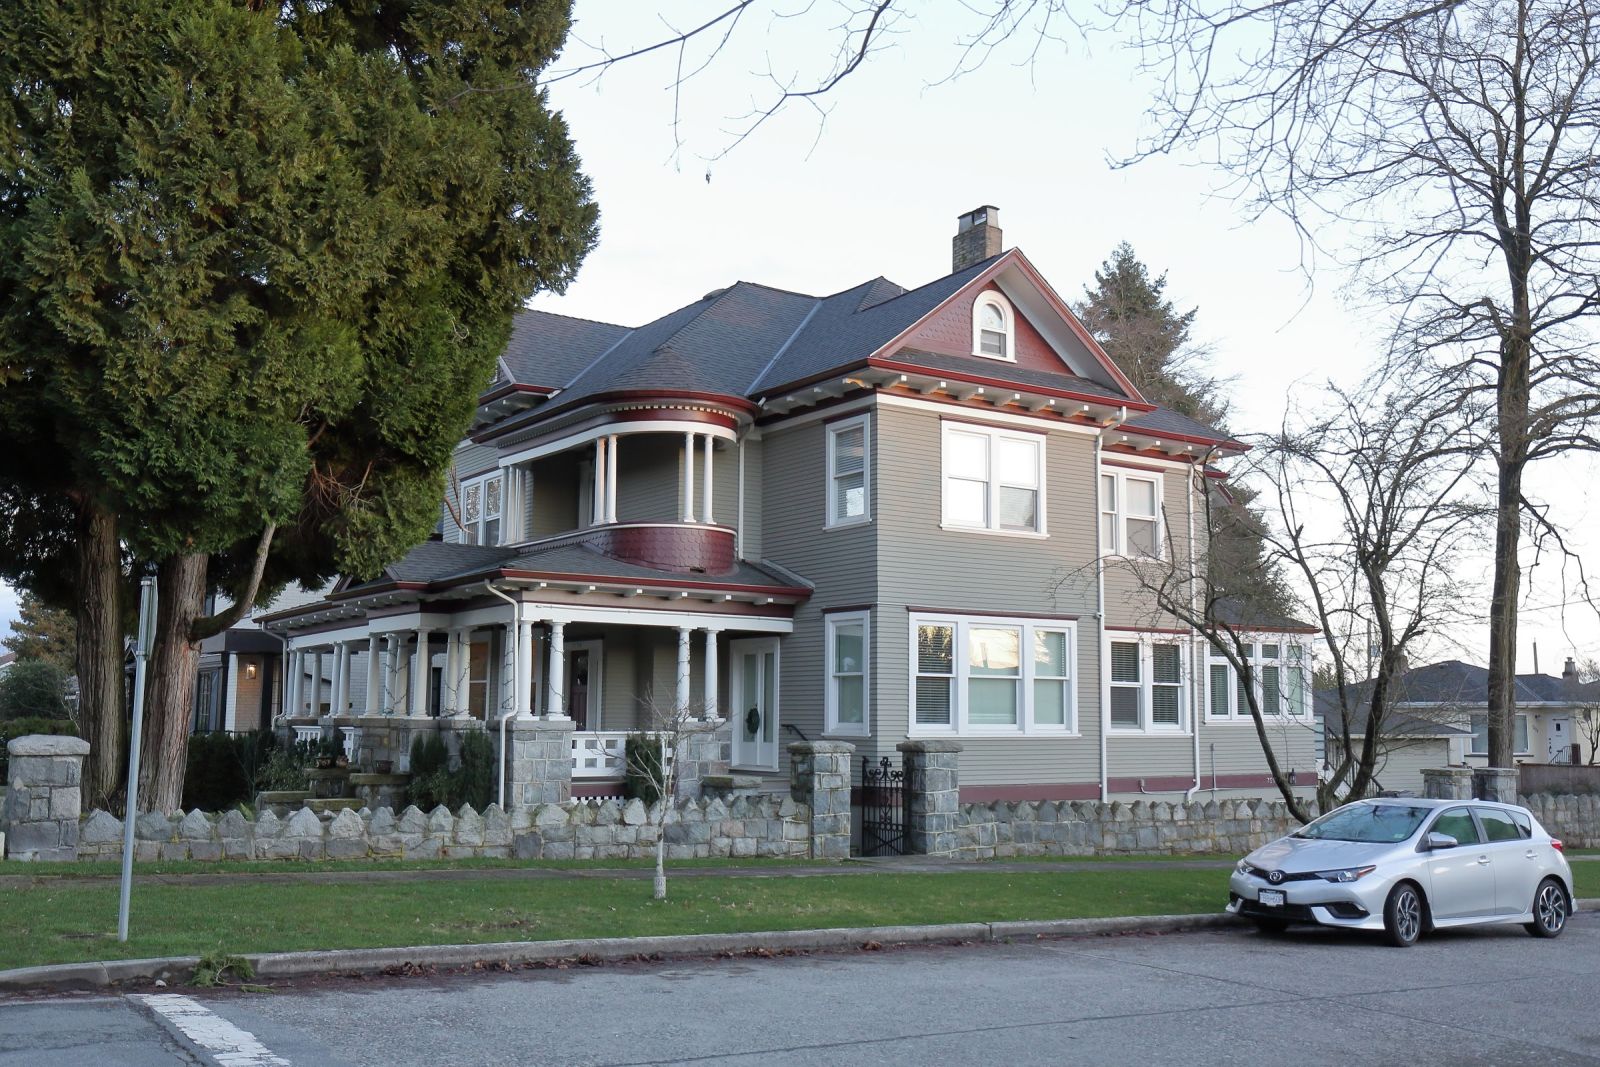 Queen Anne’s Revival style, built in 1912